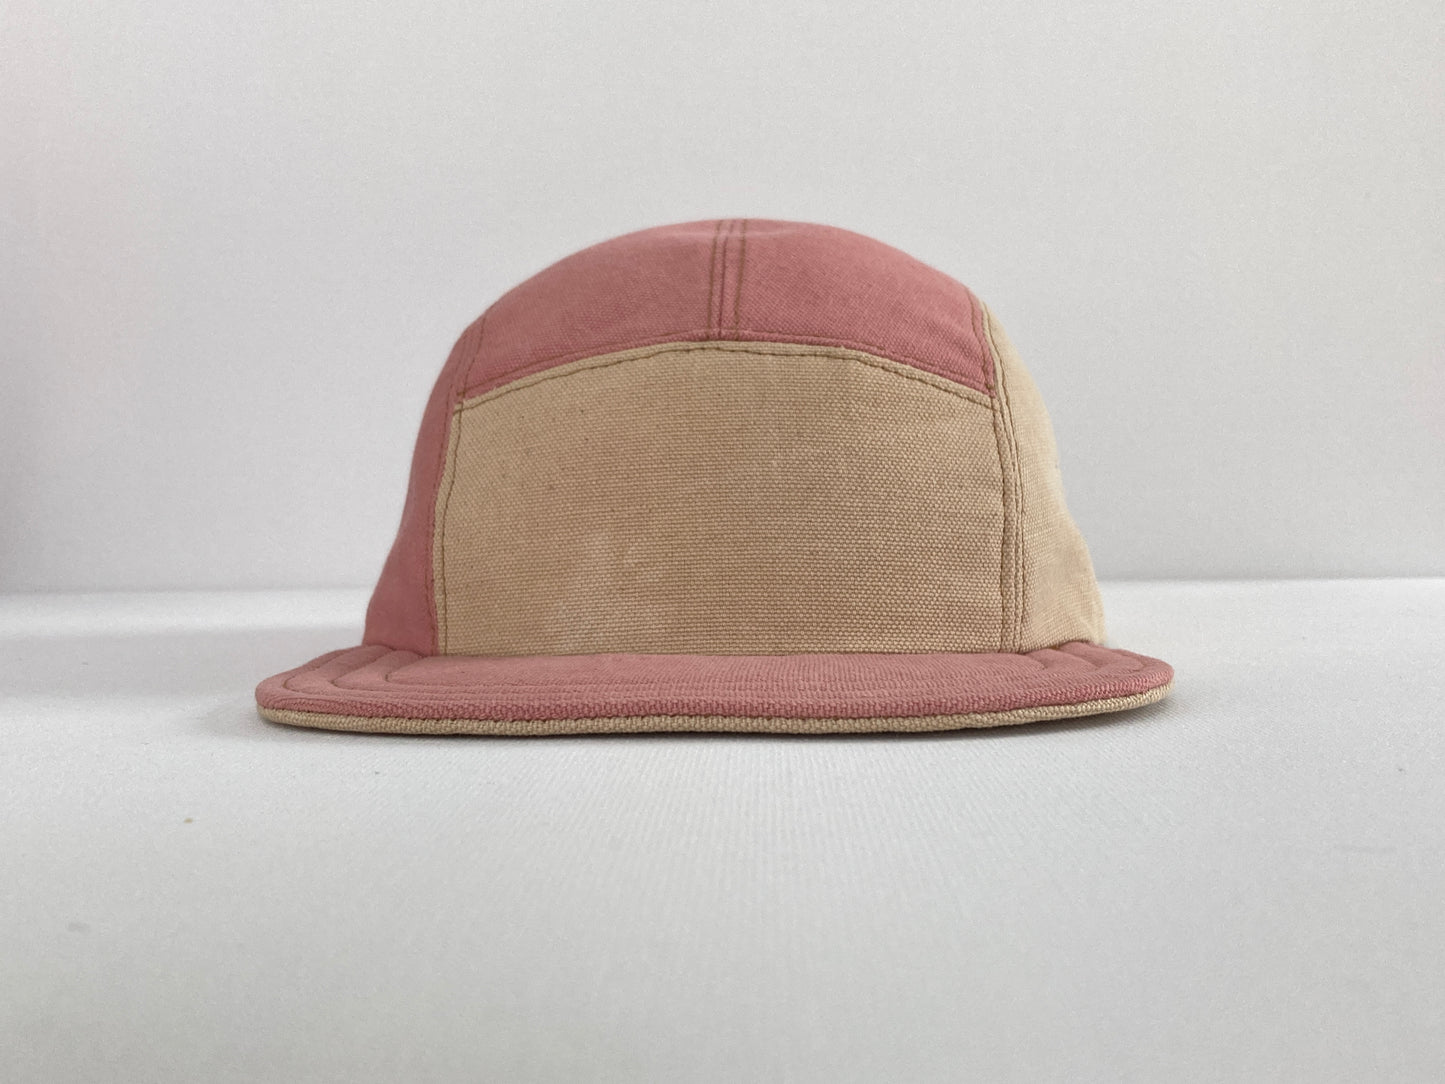 Naturally Dyed Camp Hat - Red Rock